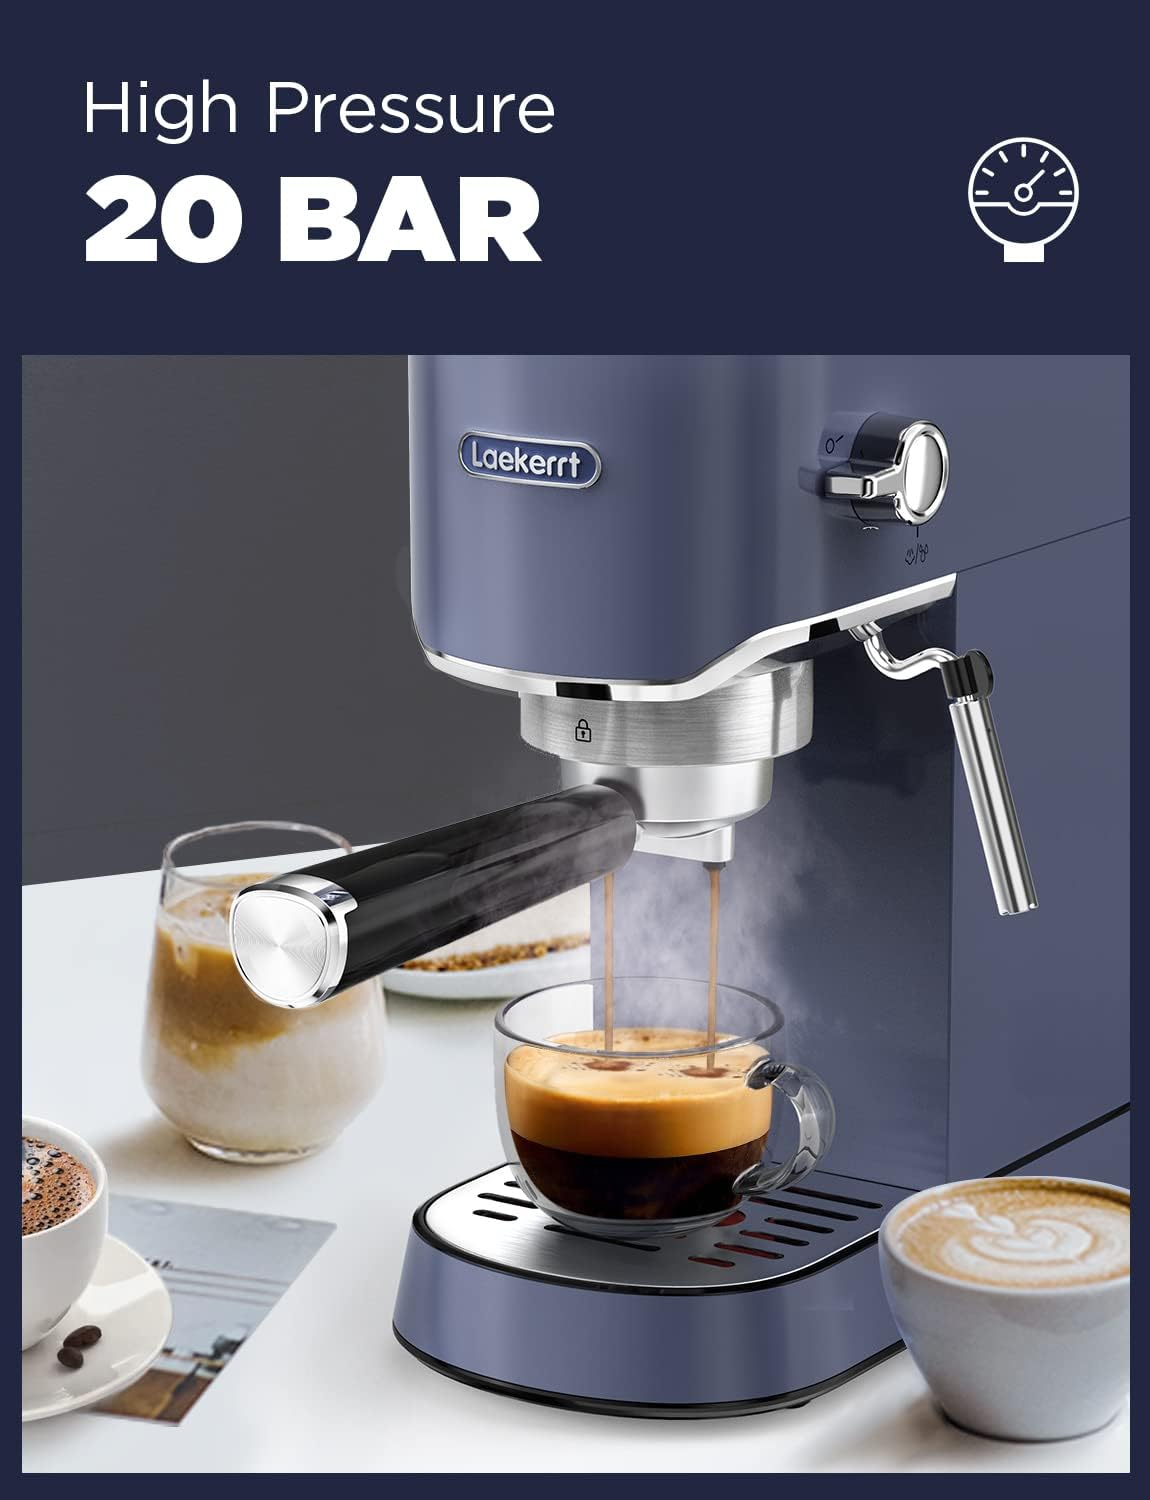 Laekerrt 20 Bar Espresso Maker CMEP01 with Milk Frother Steamer, Home Expresso Coffee Machine for Cappuccino and Latte (Navy Blue, Stainless Steel) Gift for Coffee Lovers, Father